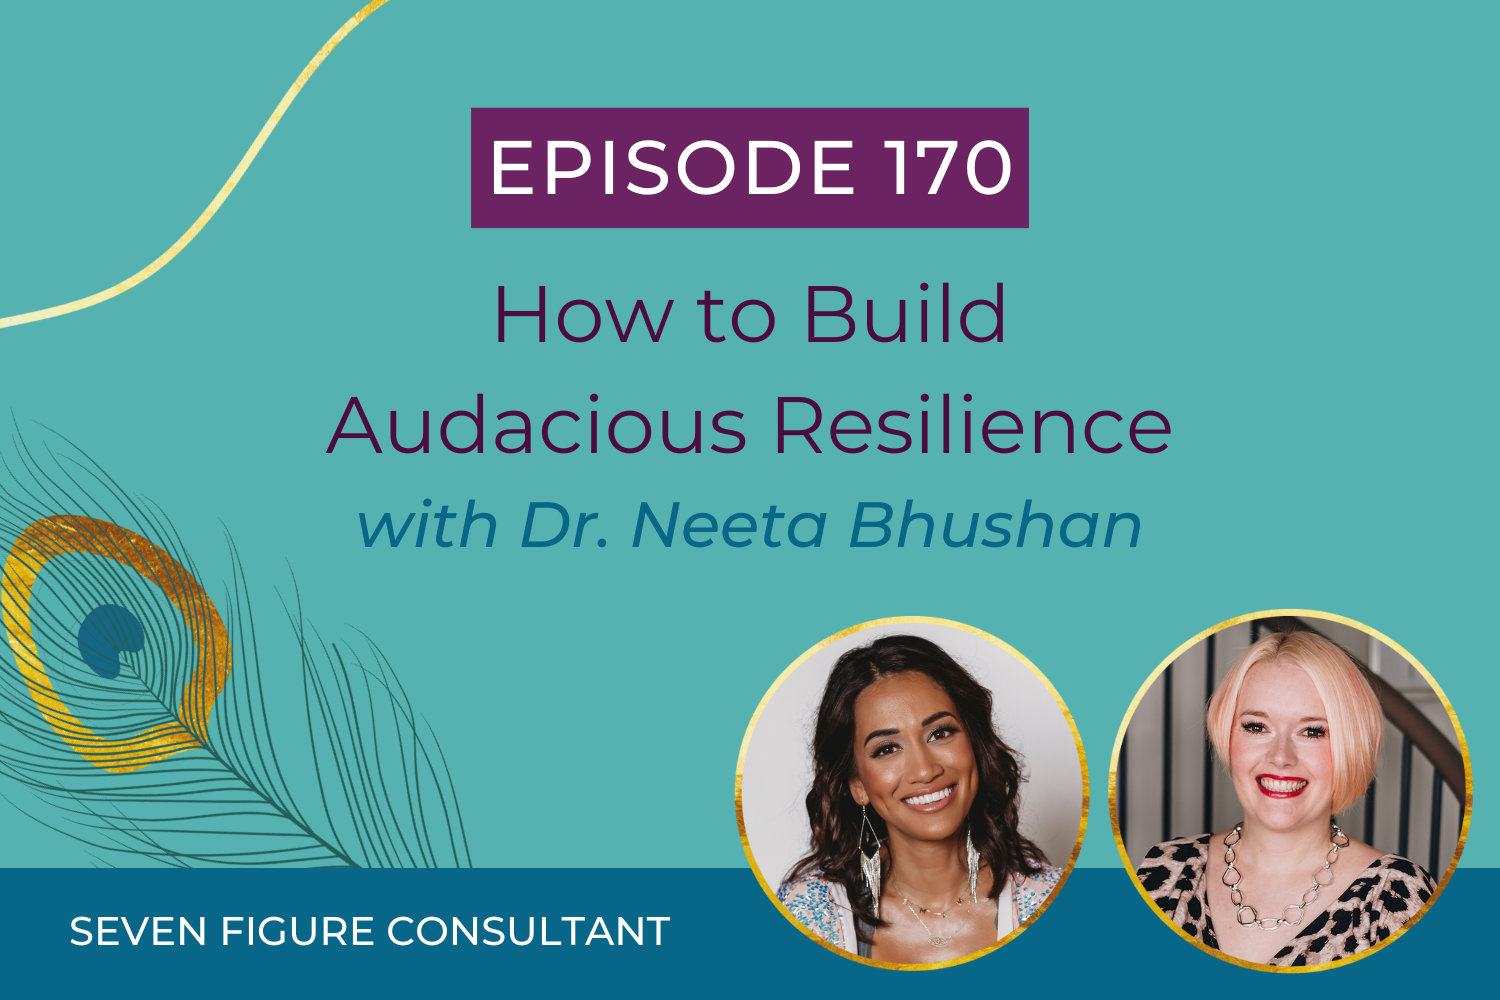 You are currently viewing Episode 170: How to Build Audacious Resilience with Dr. Neeta Bhushan